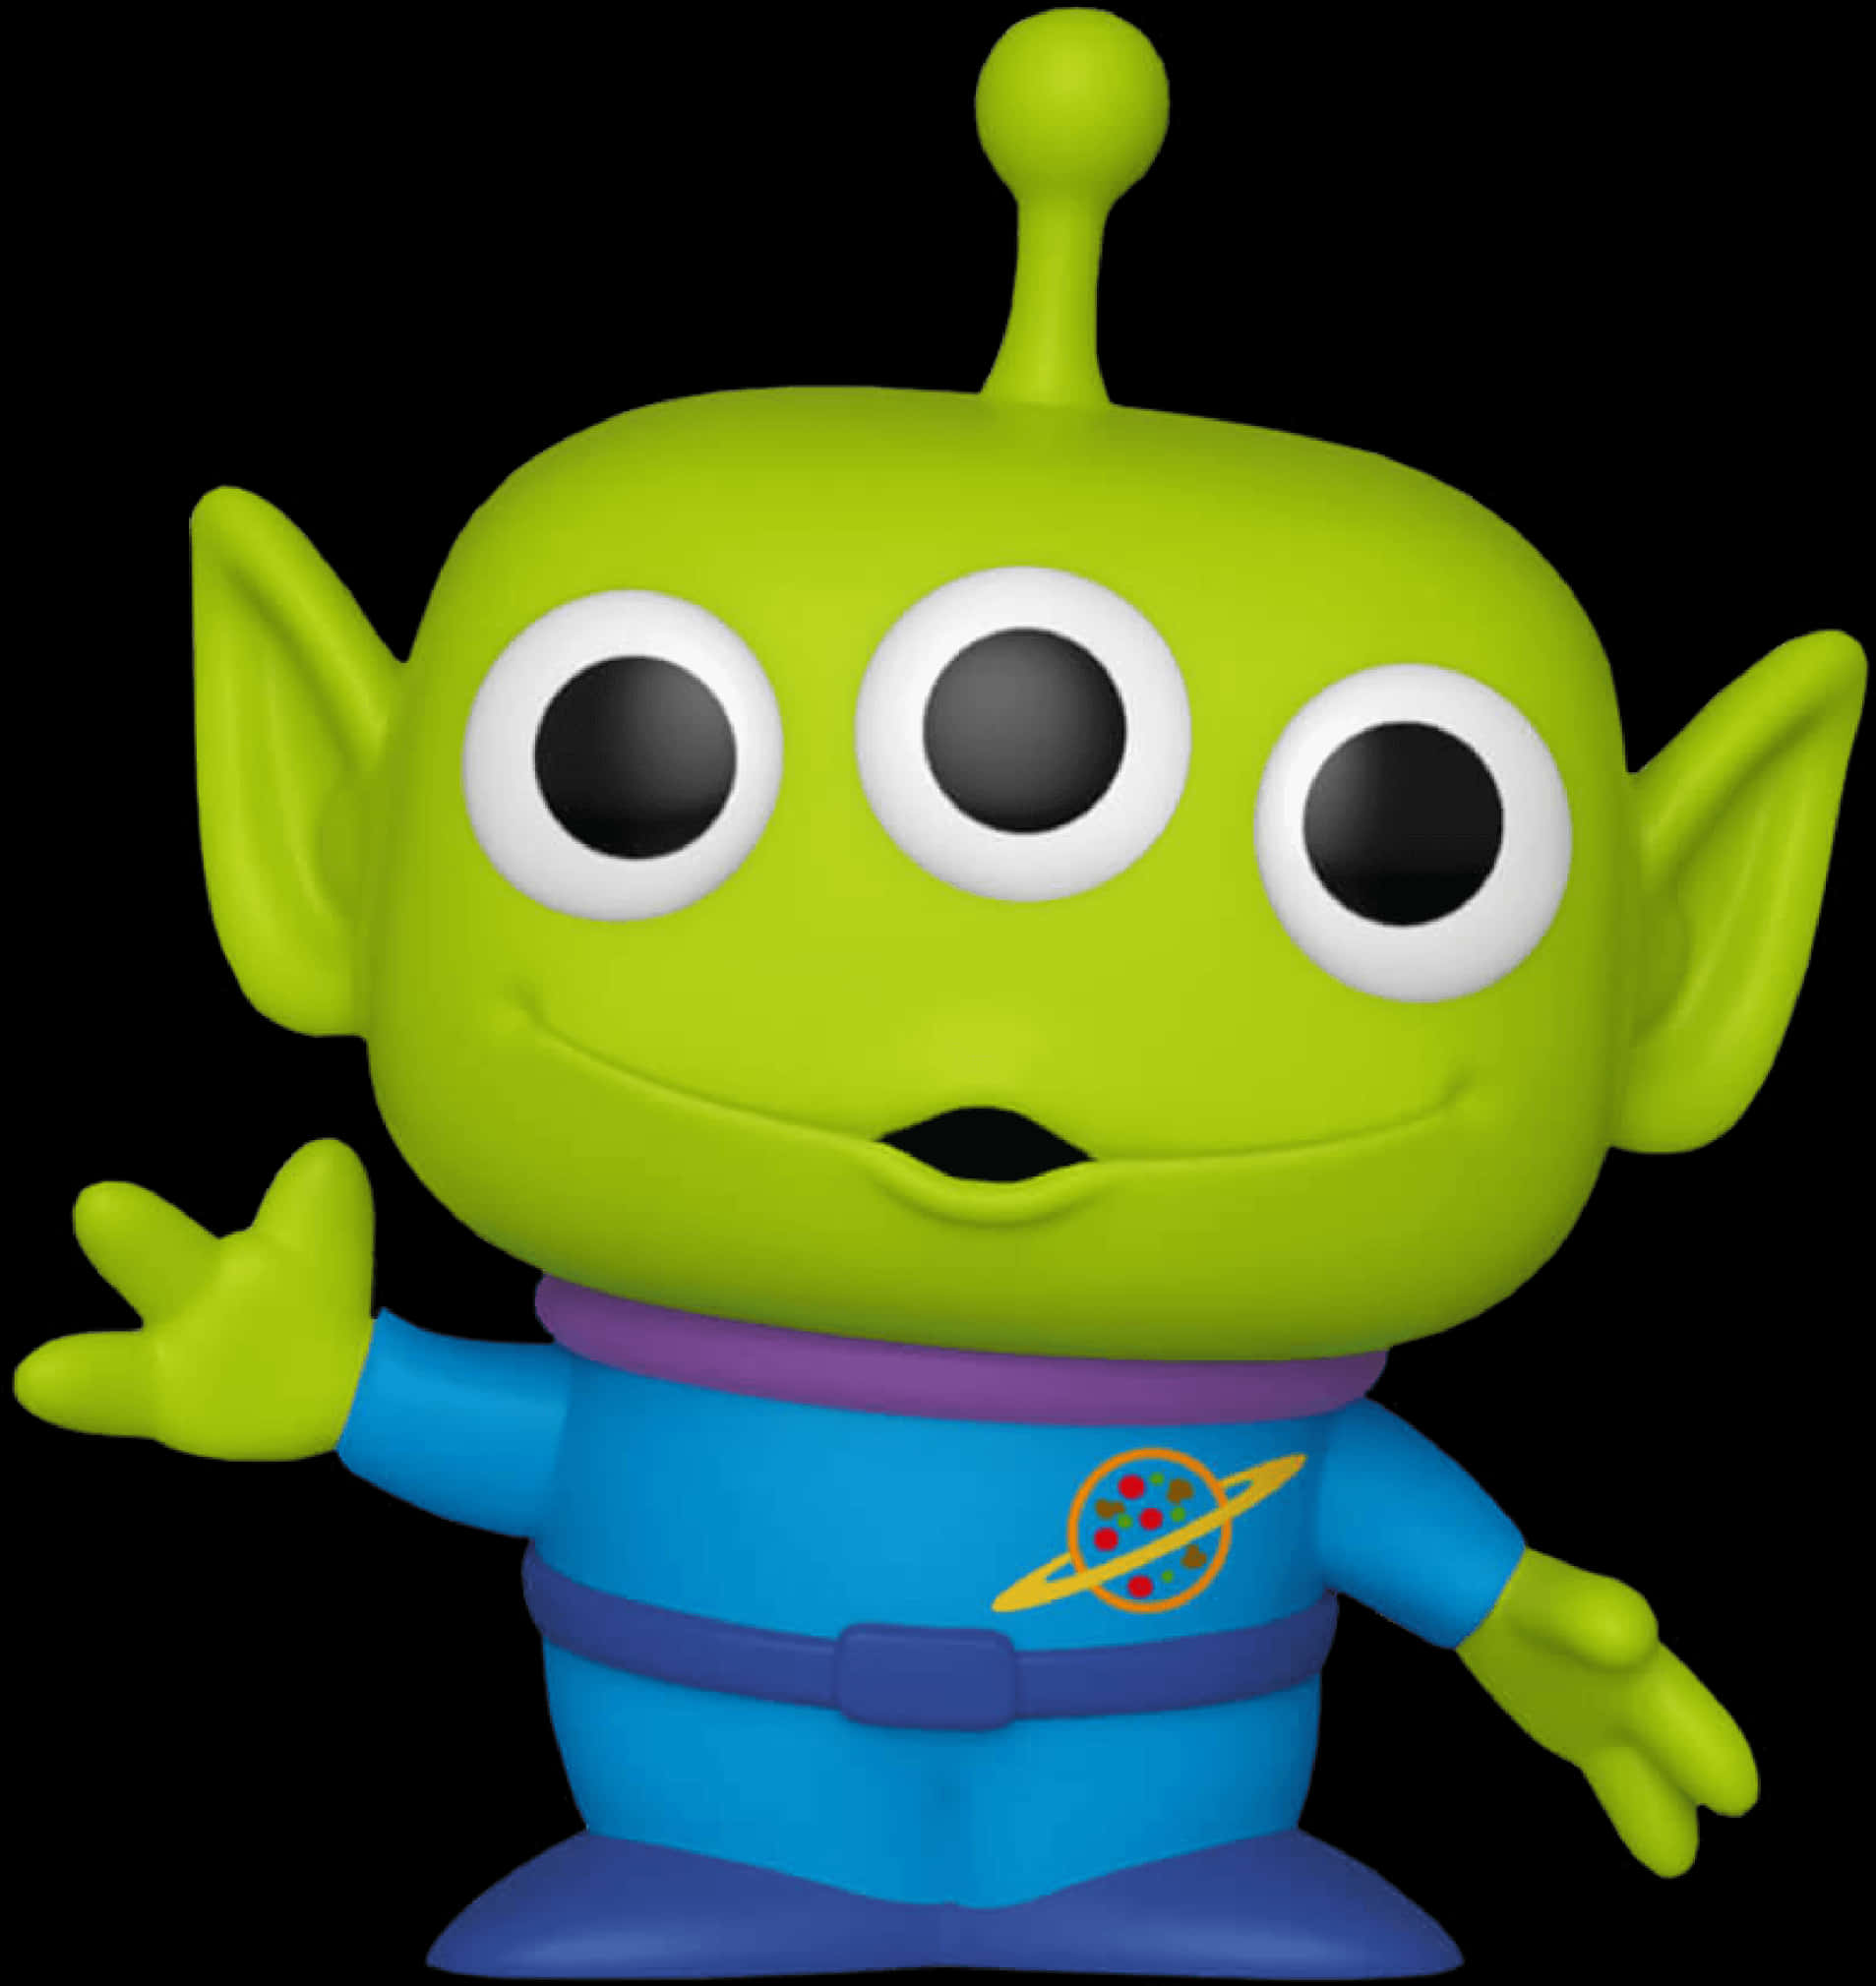 A Green Alien With Three Eyes